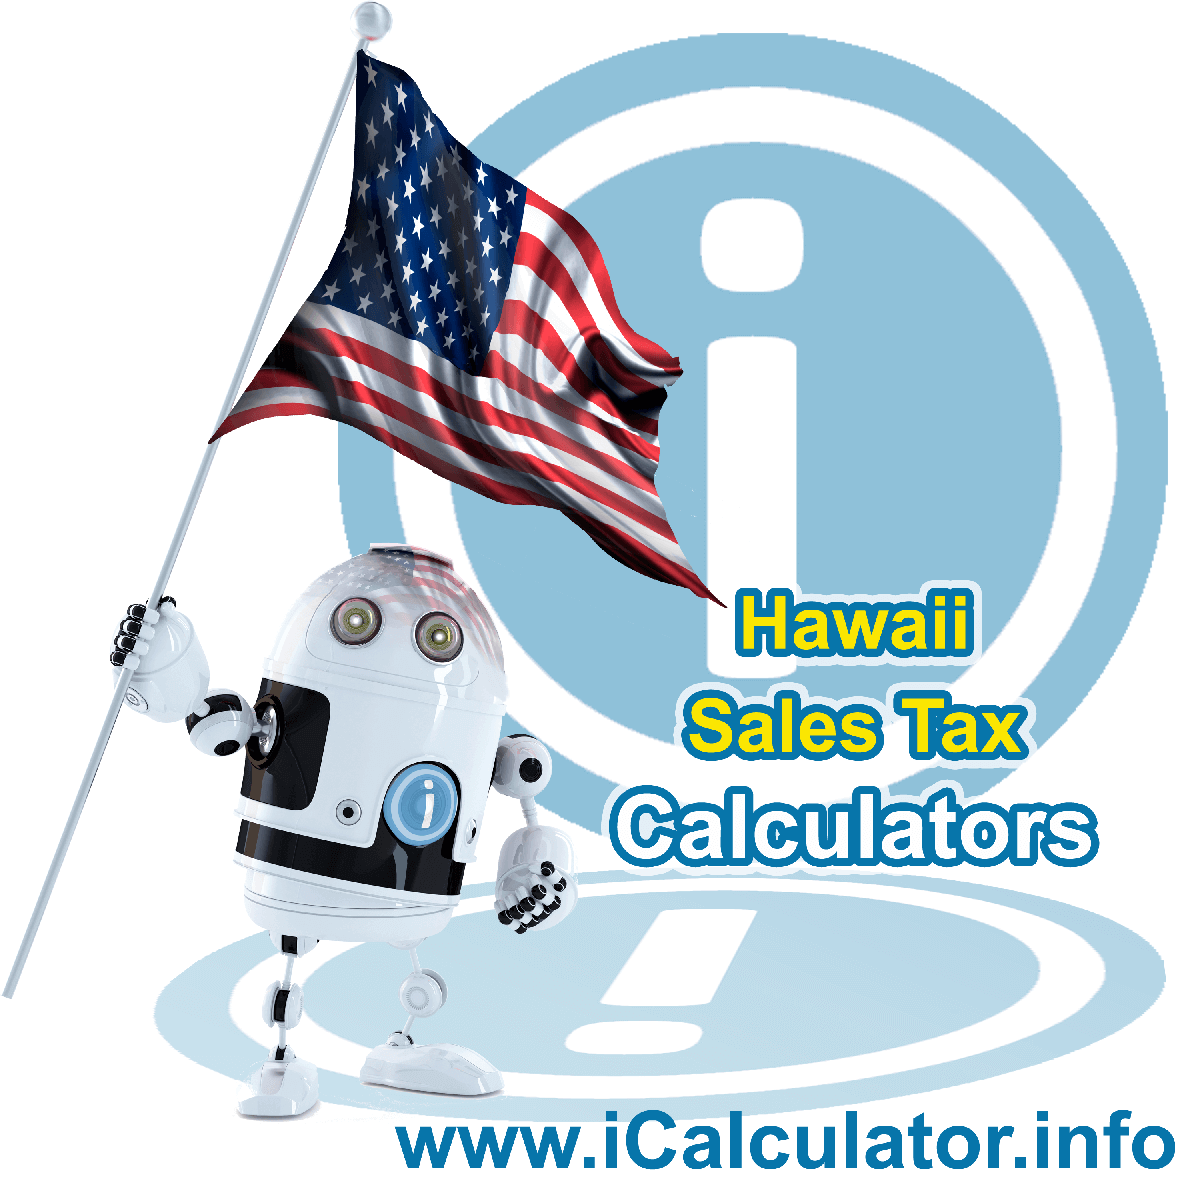 Lahaina Sales Rates: This image illustrates a calculator robot calculating Lahaina sales tax manually using the Lahaina Sales Tax Formula. You can use this information to calculate Lahaina Sales Tax manually or use the Lahaina Sales Tax Calculator to calculate sales tax online.